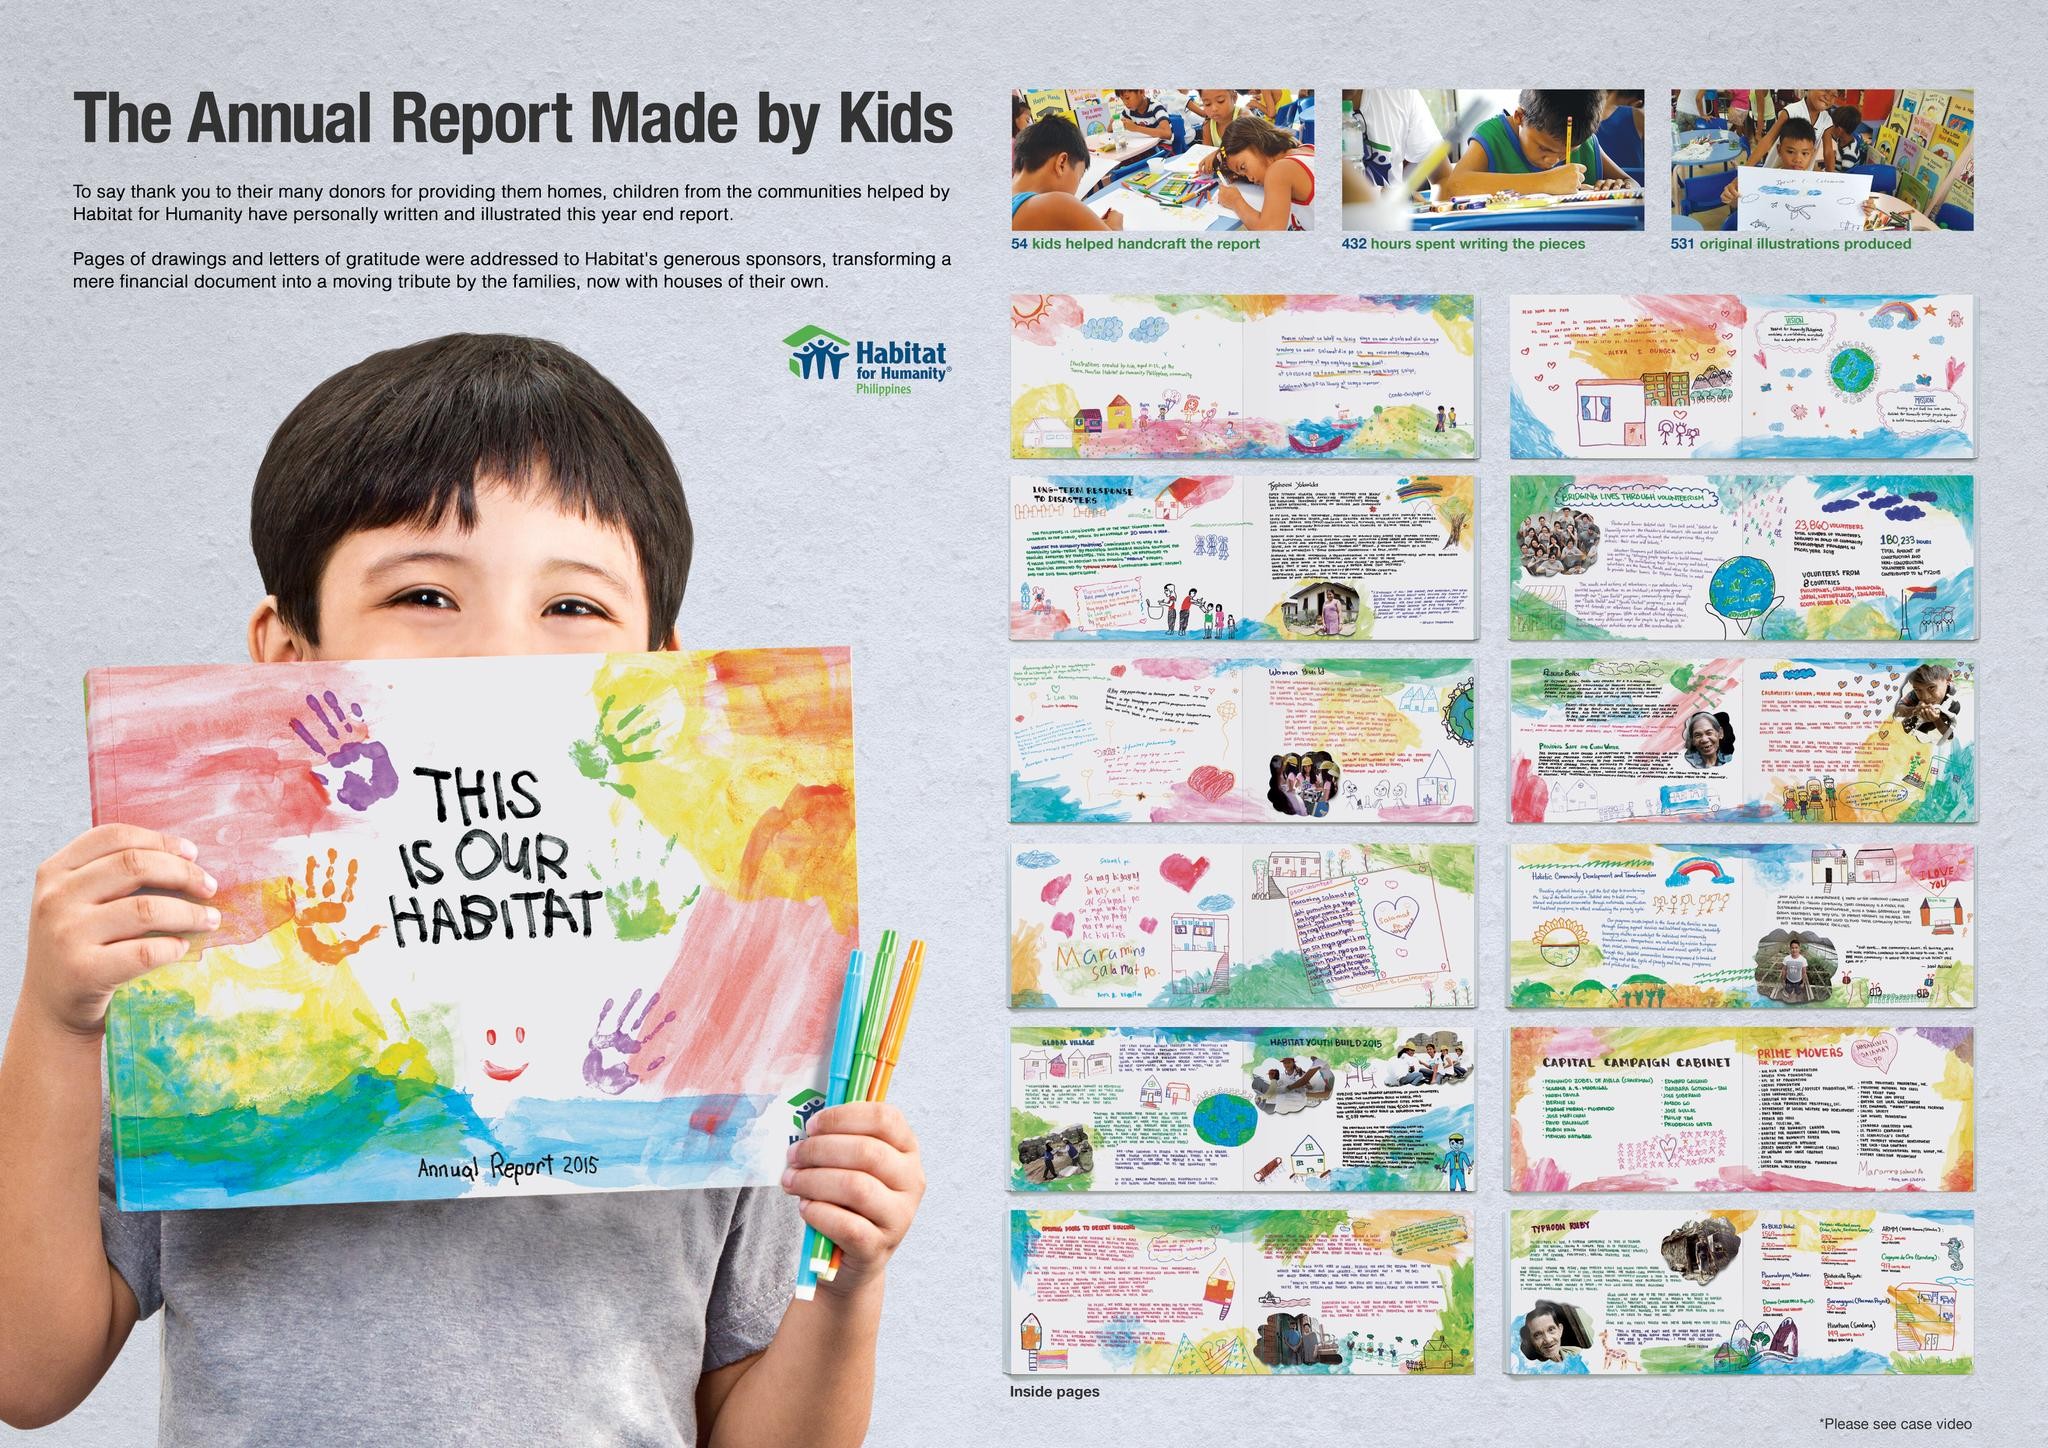 THE ANNUAL REPORT MADE BY KIDS